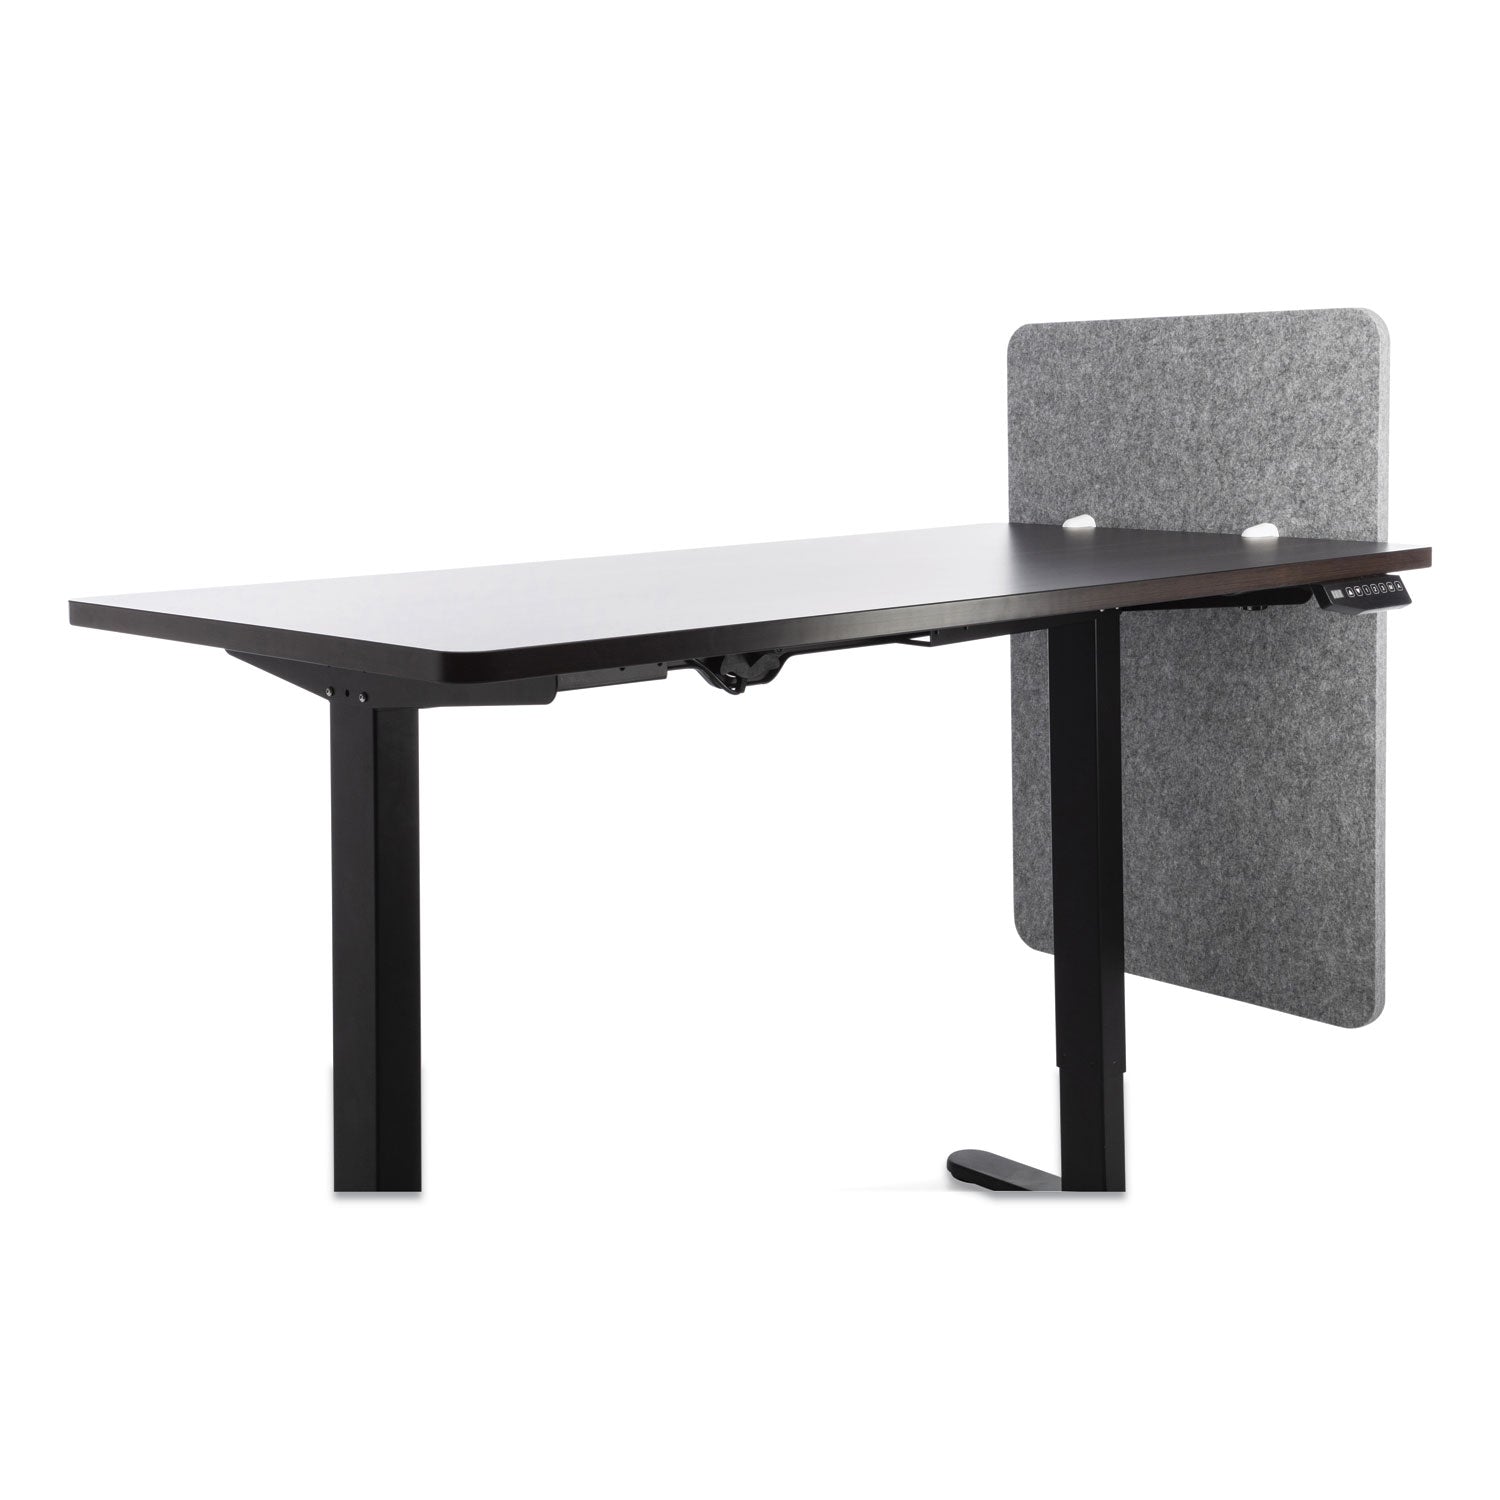 desk-modesty-adjustable-height-desk-screen-cubicle-divider-and-privacy-partition-235-x-1-x-36-polyester-gray_gn1ludm24361g - 2